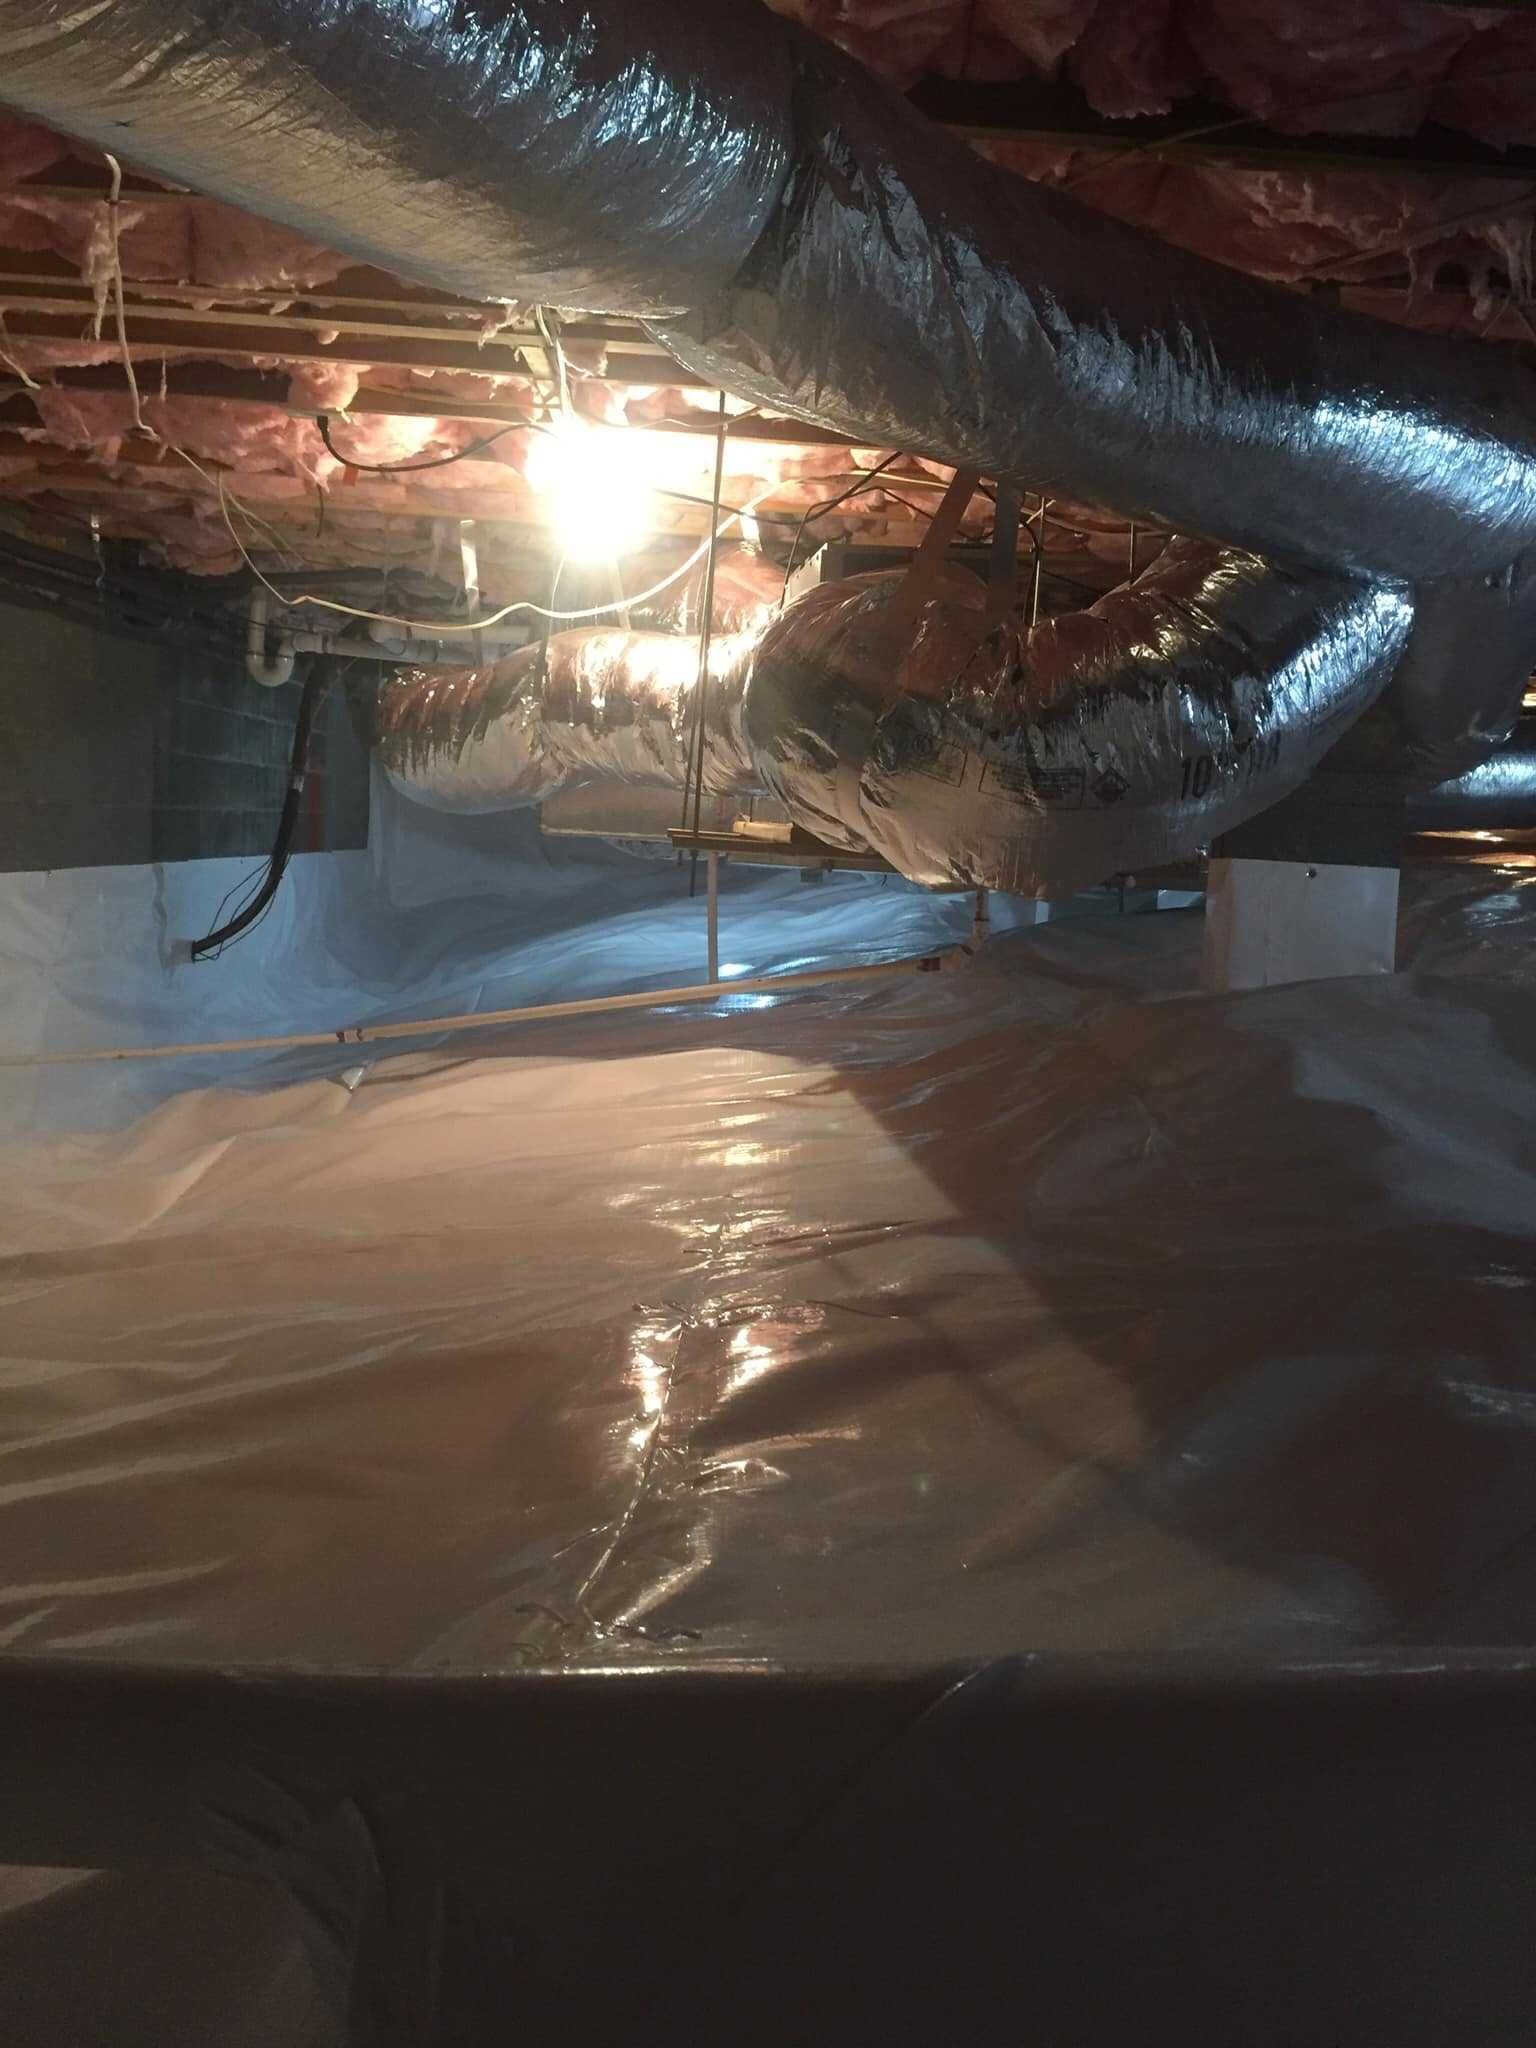 after crawlspace encapsulation and radon mitigation in Boone NC